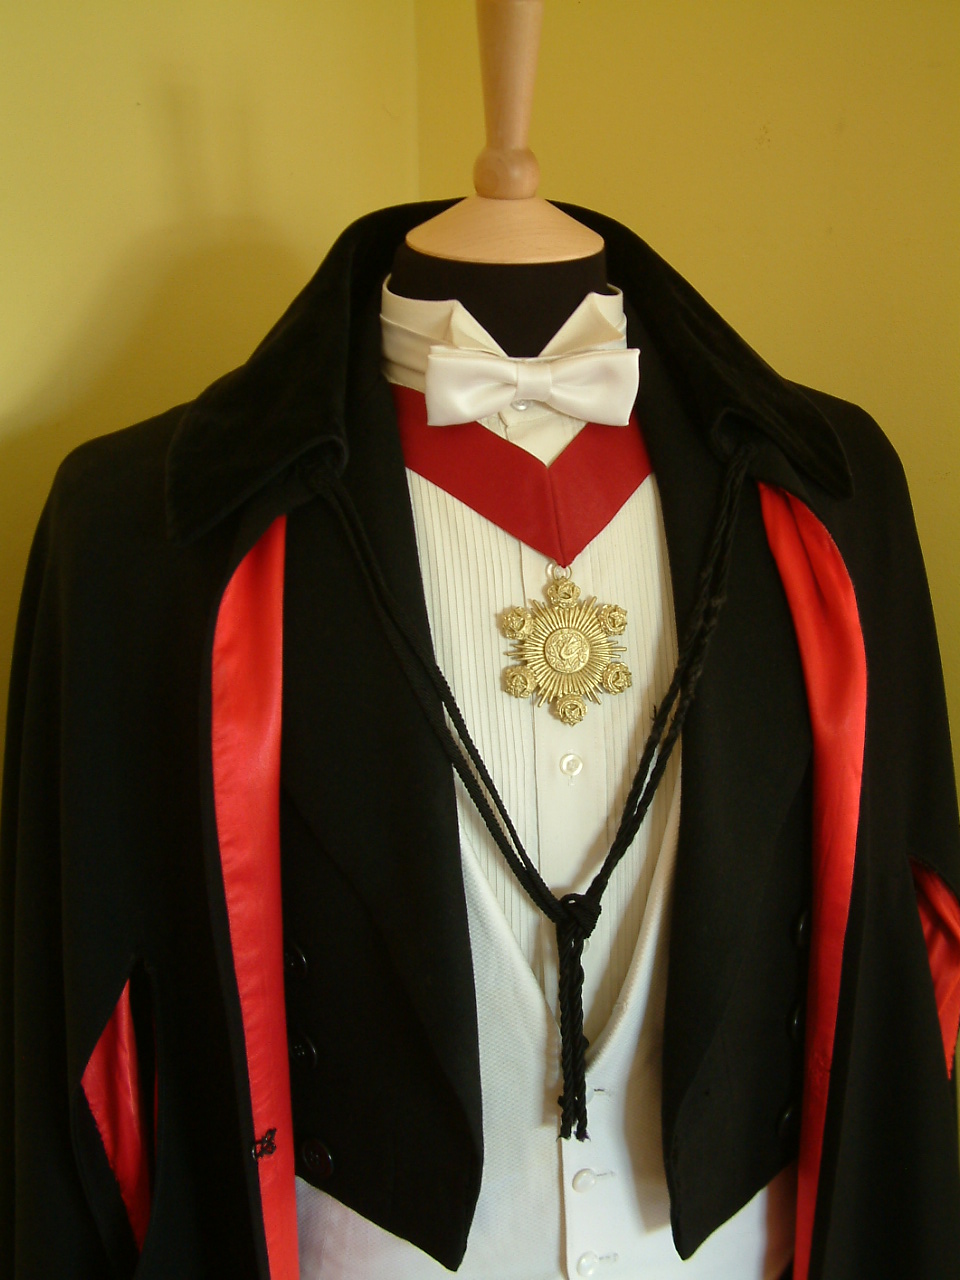 Dracula Medallion - 1931 Lugosi Prop | Page 2 | RPF Costume and Prop Maker  Community